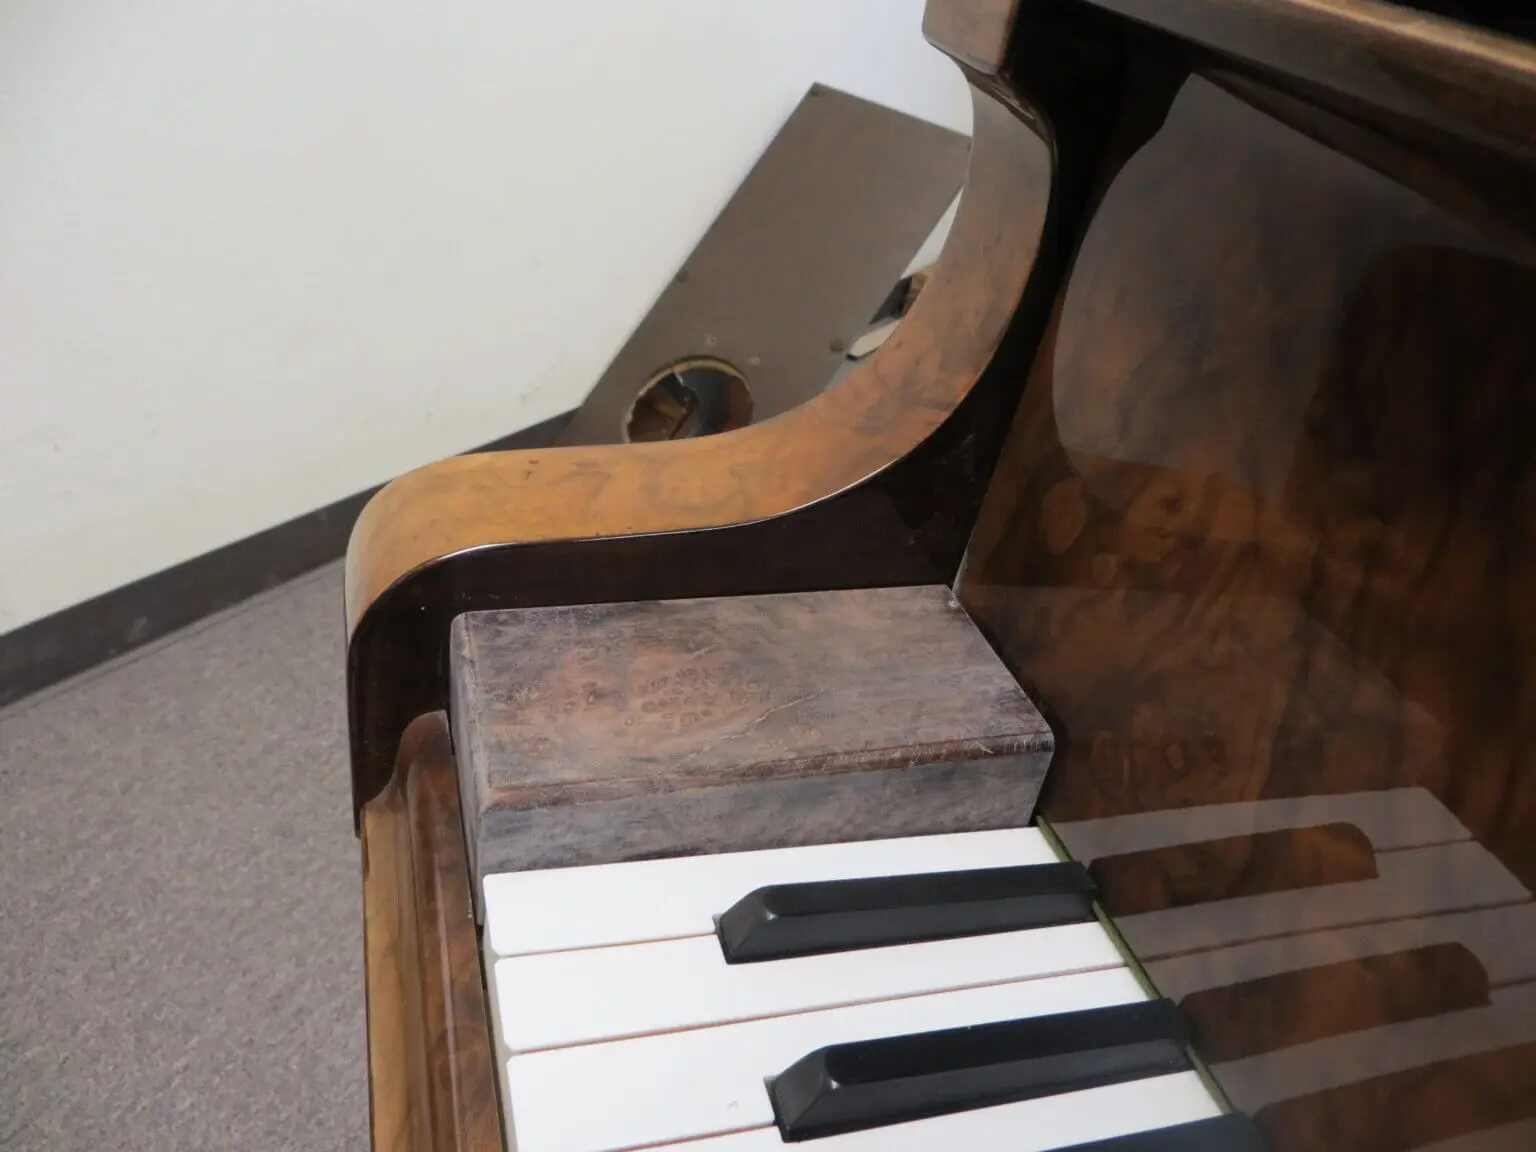 A piano with a wooden case on top of it.